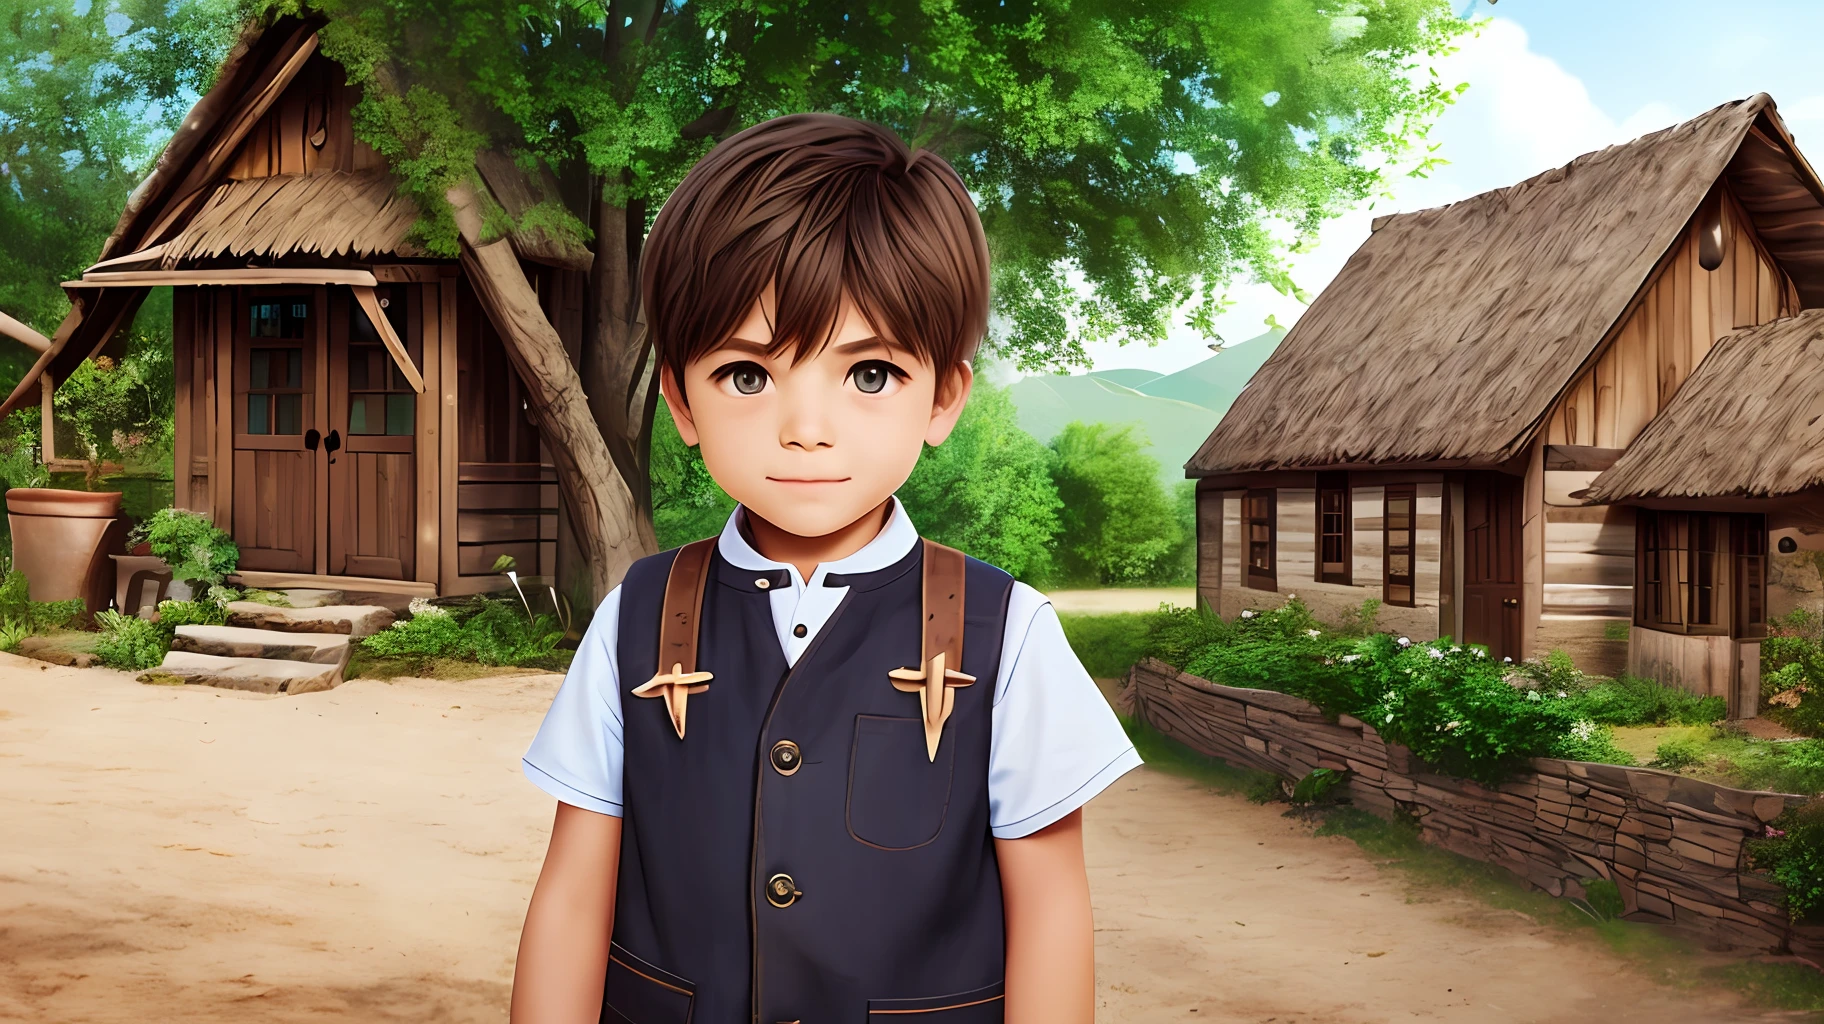 Visualize a small village with simple, rustic surroundings. Show a determined young boy with a sparkle in his eyes, symbolizing his dreams and aspirations --auto